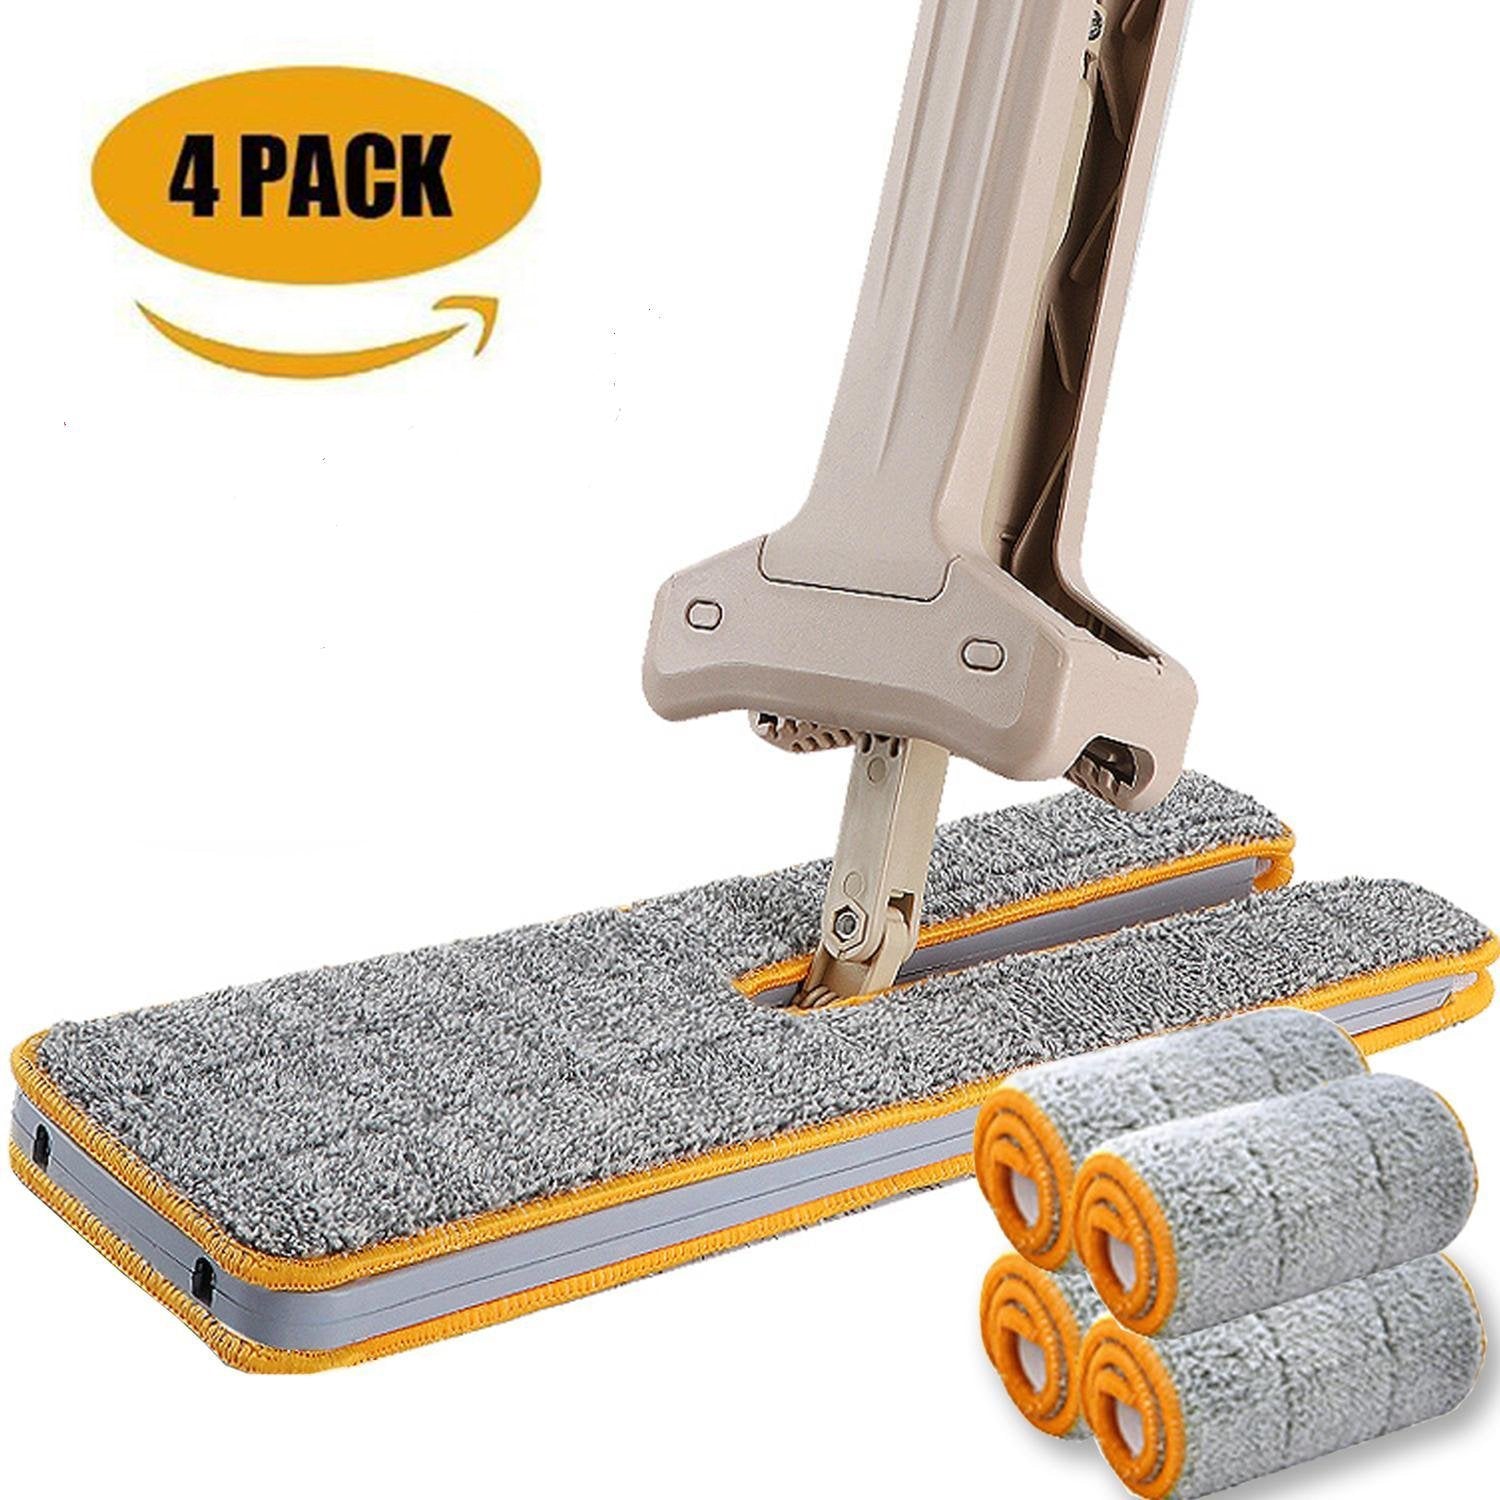 Towney Double Sided Flat Mop- Microfiber Lazy Flip Floor Mop 360 Spin & Automatic Squeeze Handwash Free Wet and Dry Floor Cleaner for Living Room,Kitchen,Bathroom (4 Mop Clothes All In)